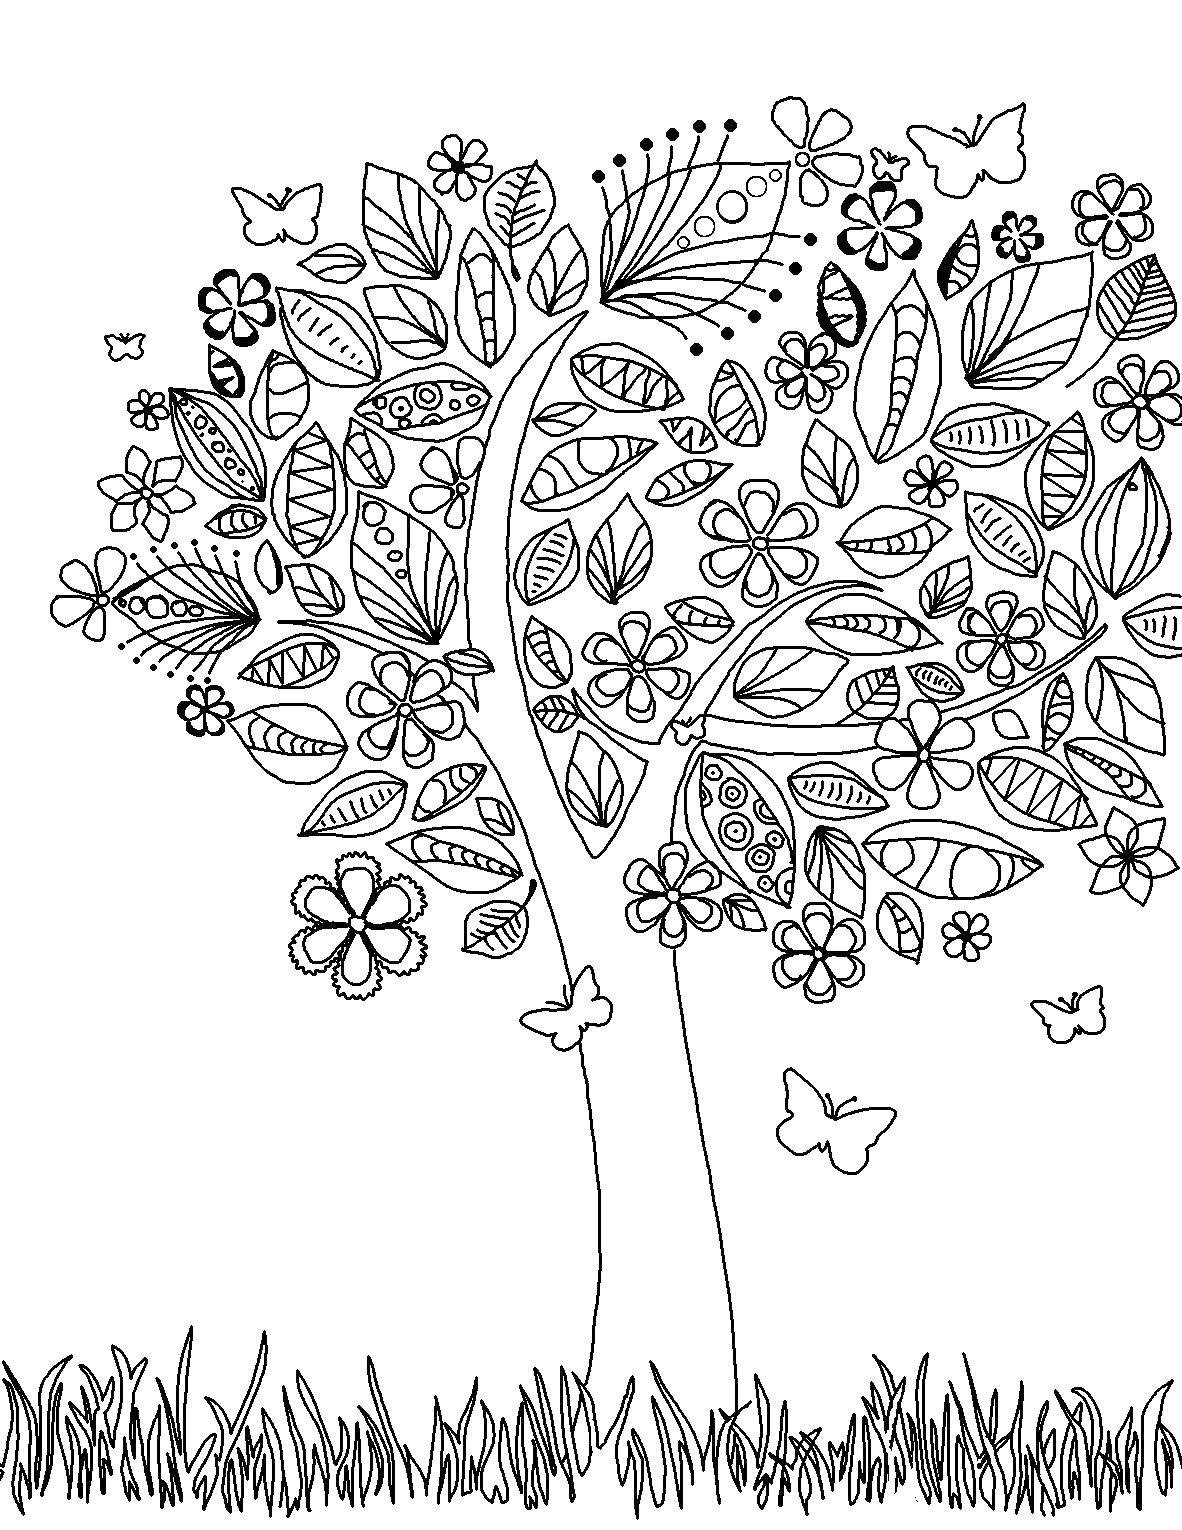 Coloring Tree of antistess. Category coloring antistress. Tags:  tree, butterflies.